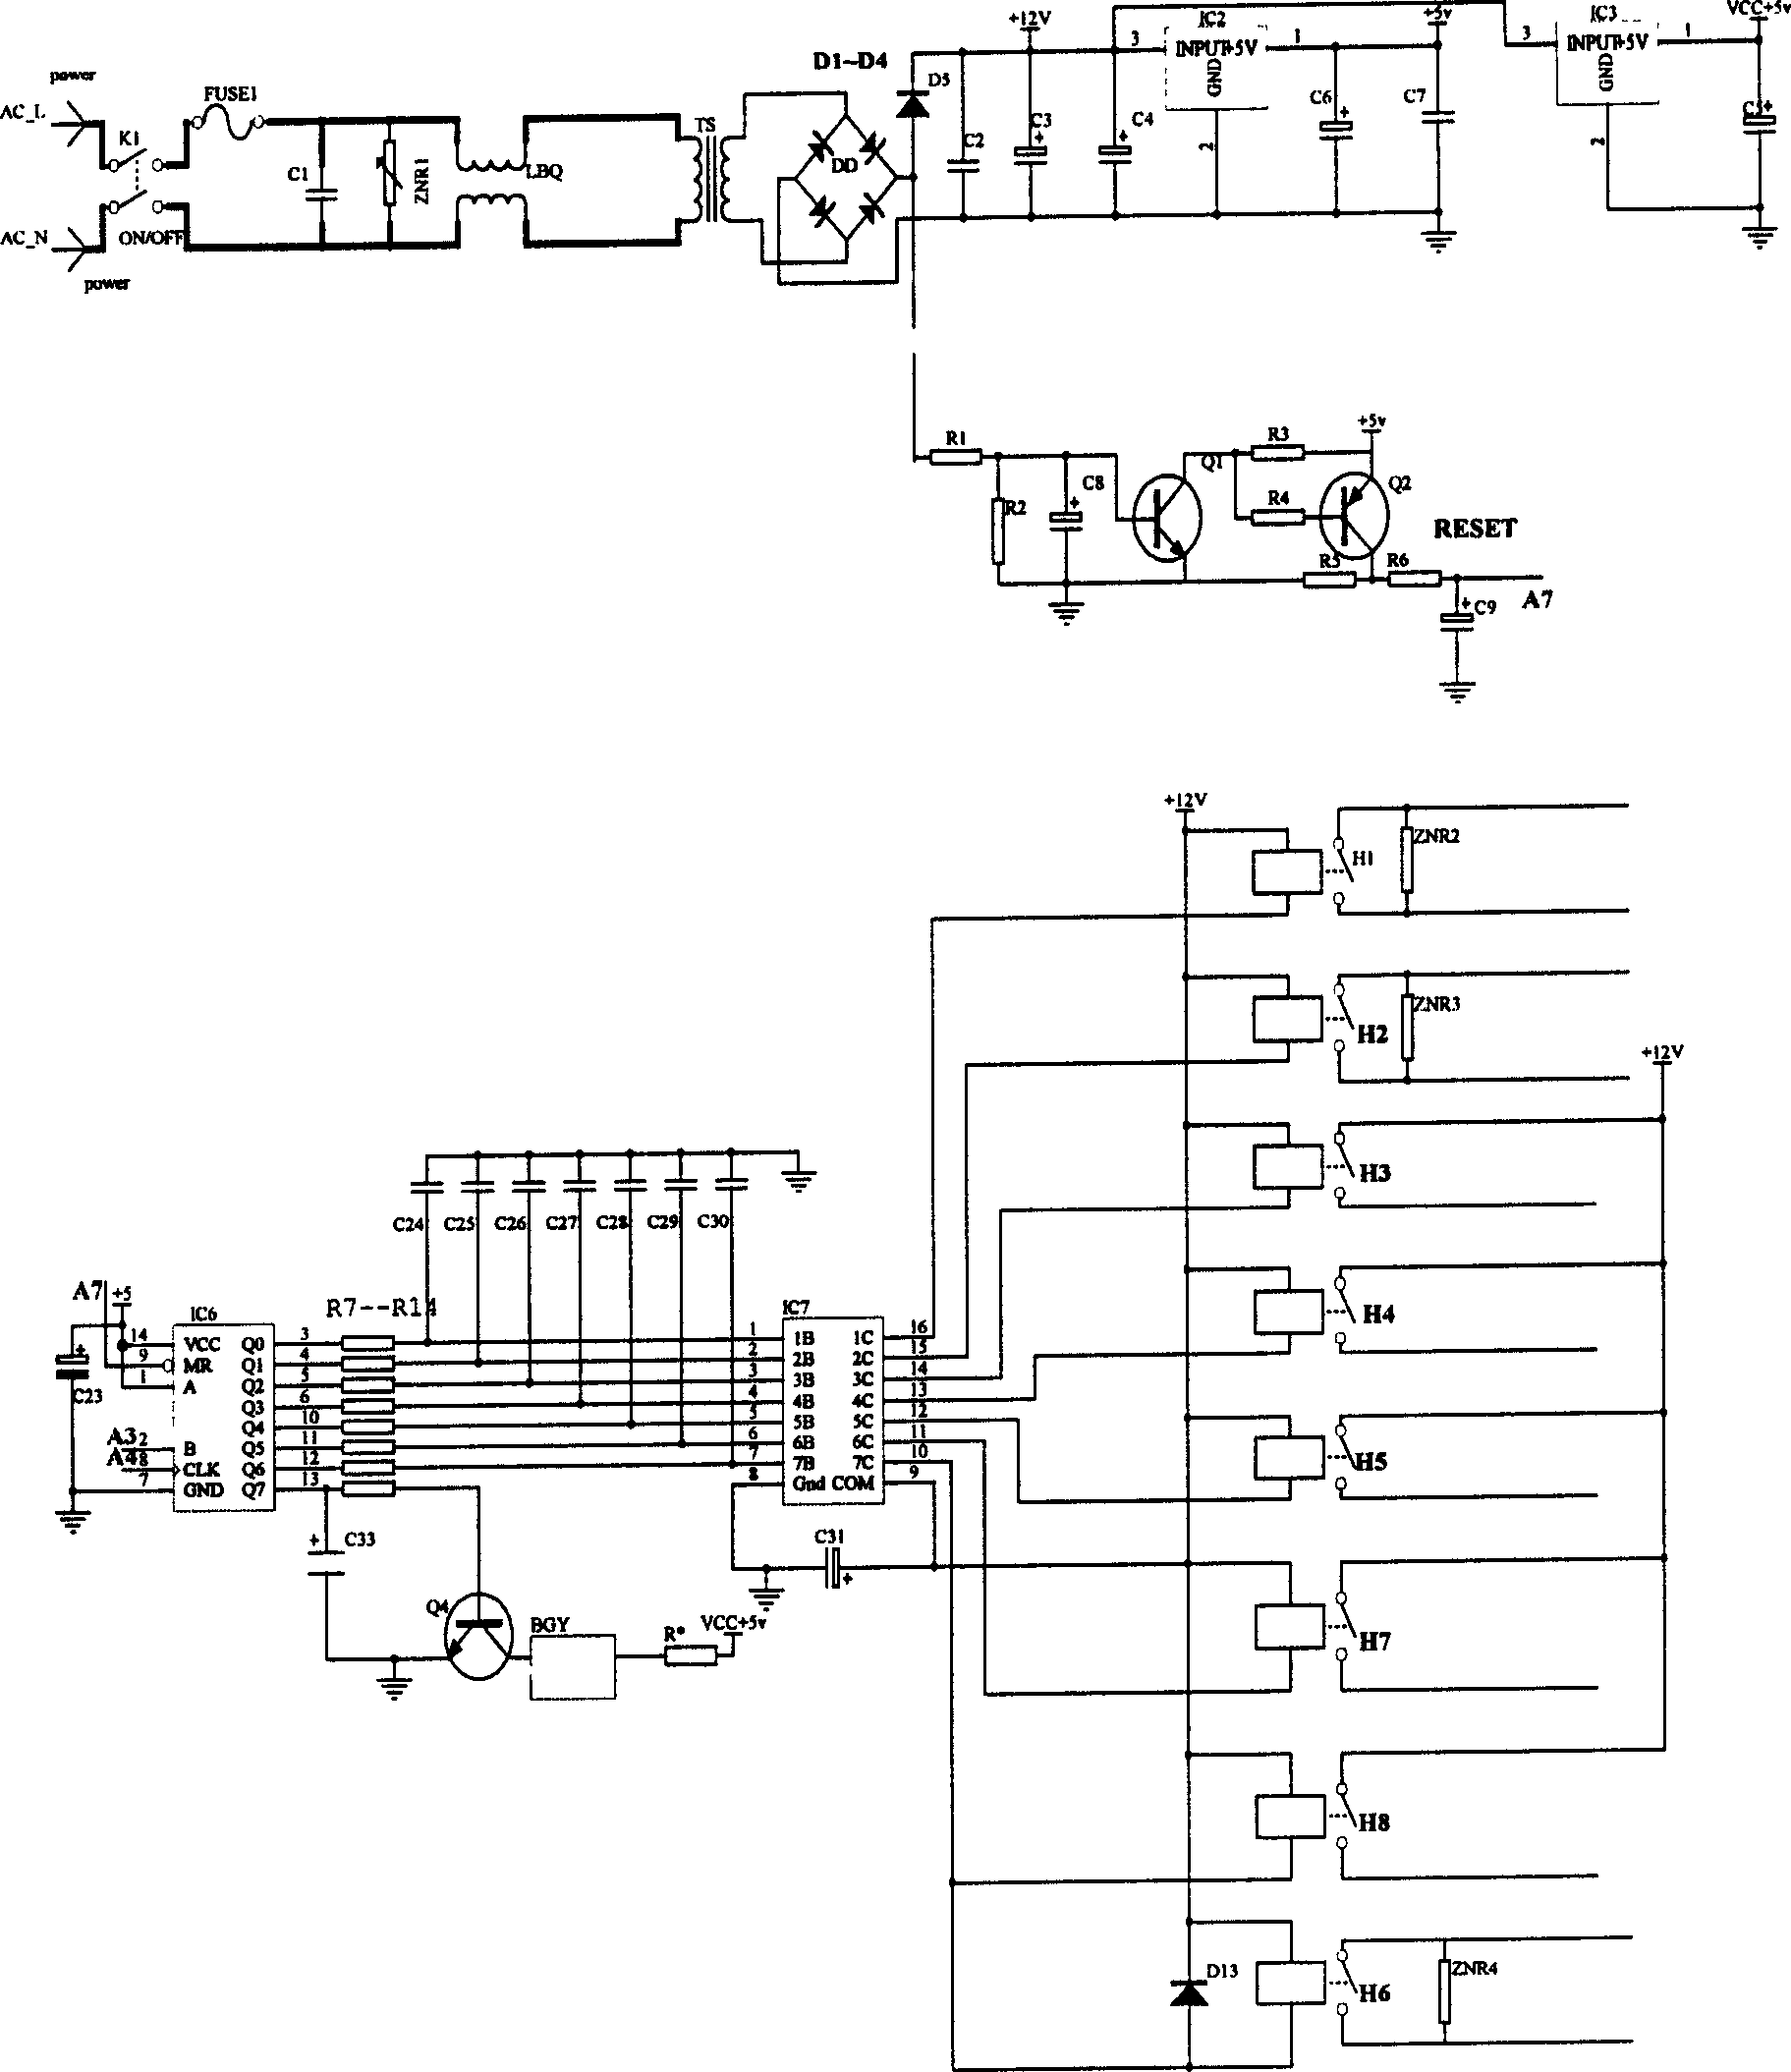 Computer controller in drinking water device capable of testing conductivity of water